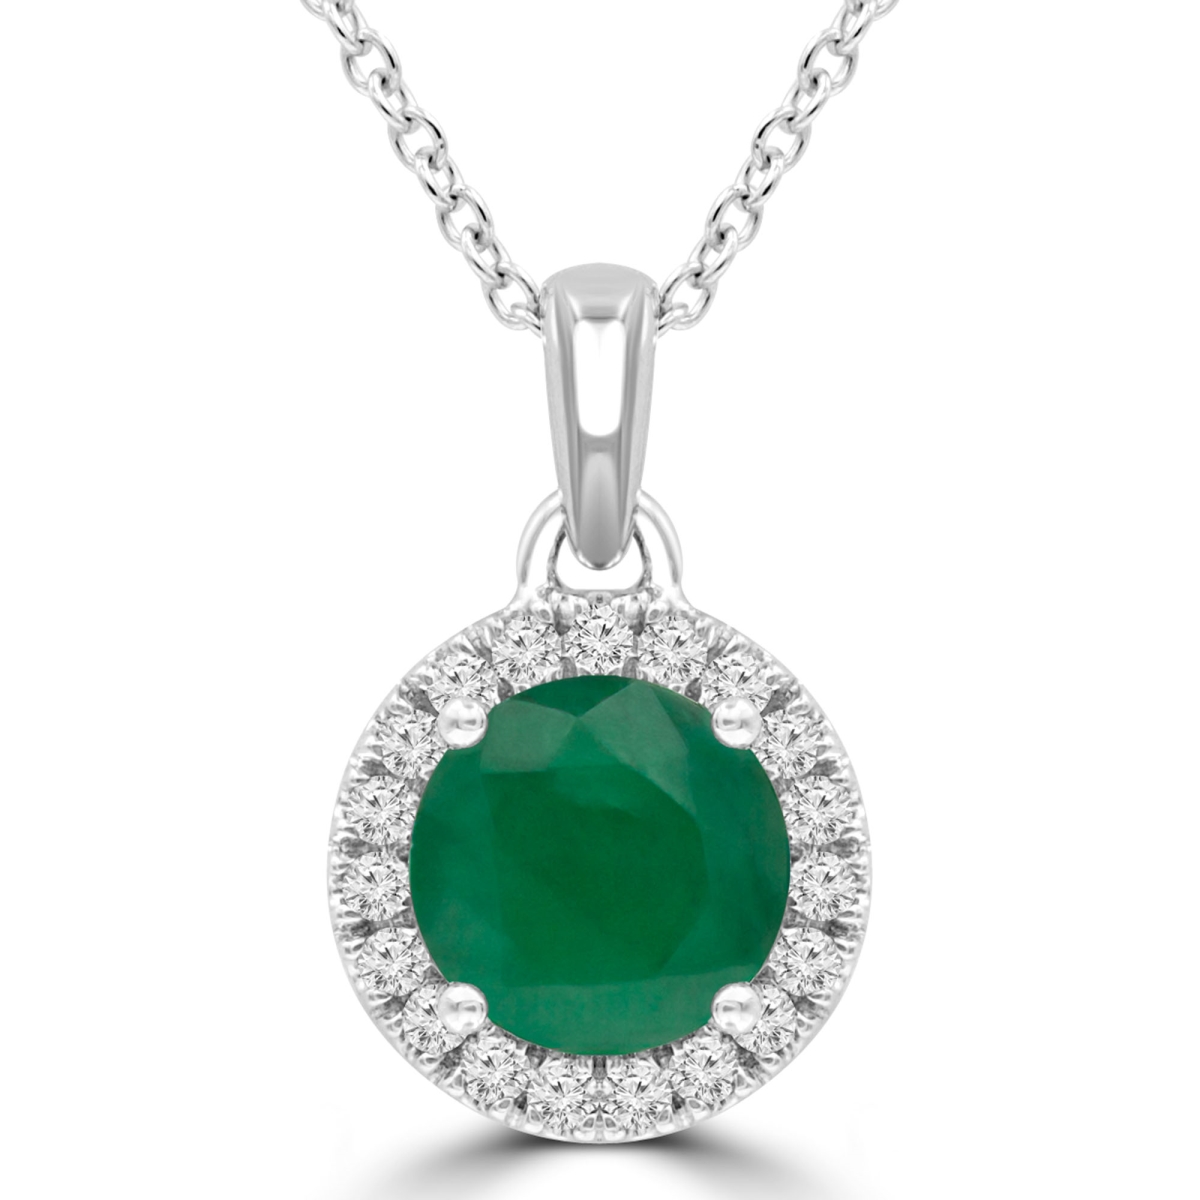 Picture of Majesty Diamonds MDR220185 1.05 CTW Round Green Emerald Halo Pendant Necklace in 14K White Gold